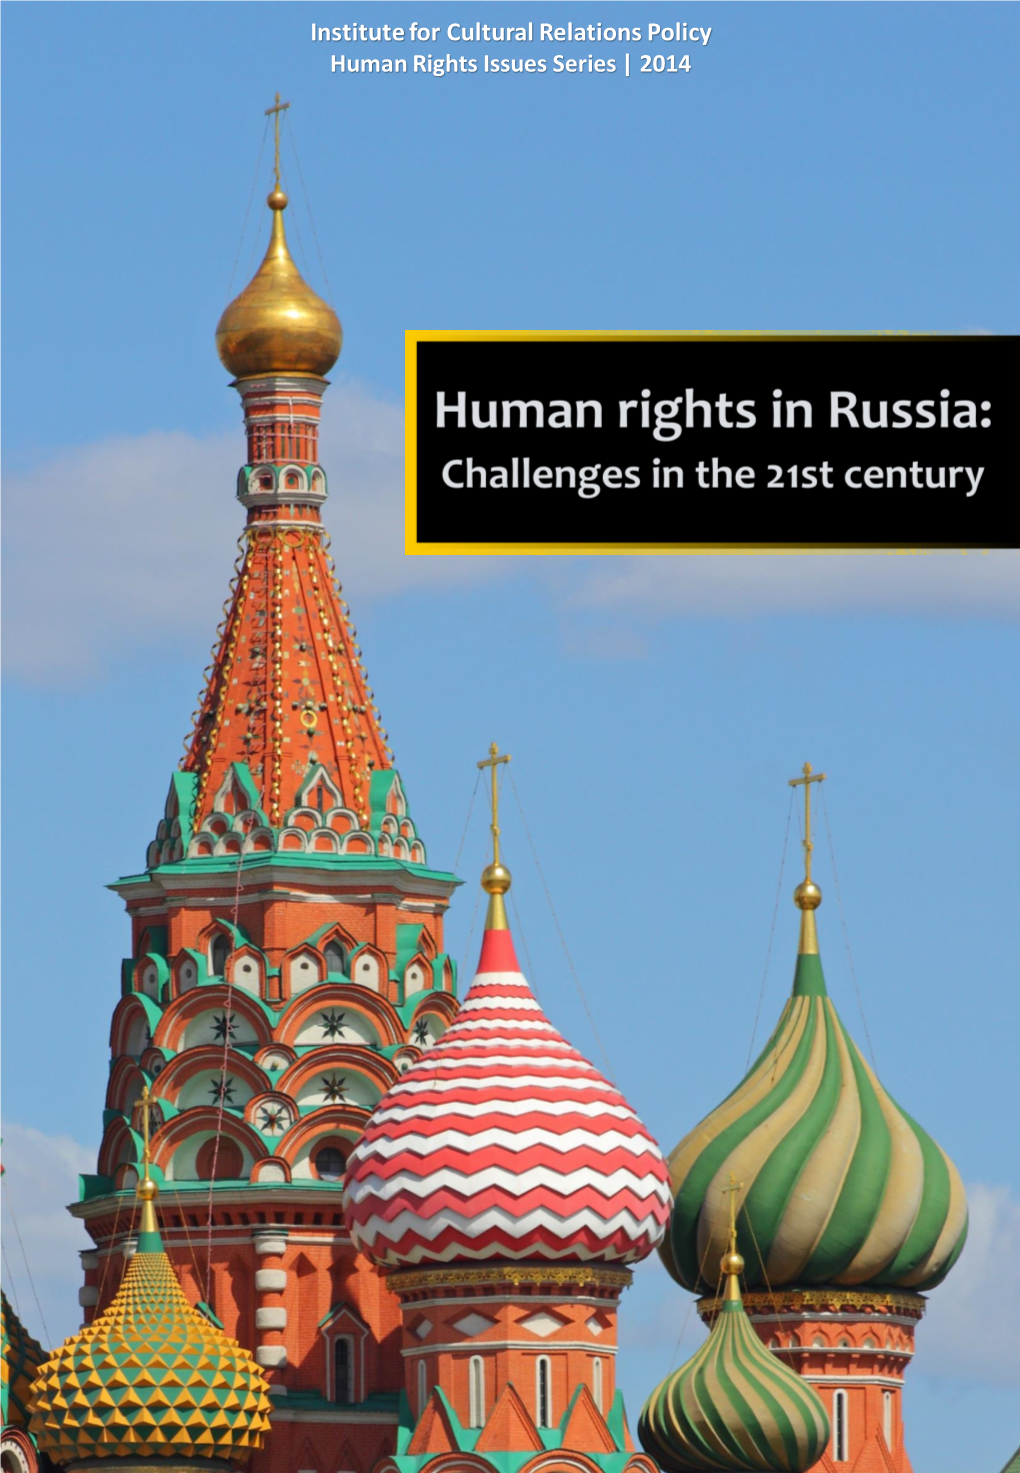 Human Rights in Russia: Challenges in the 21St Century ICRP Human Rights Issues Series | 2014